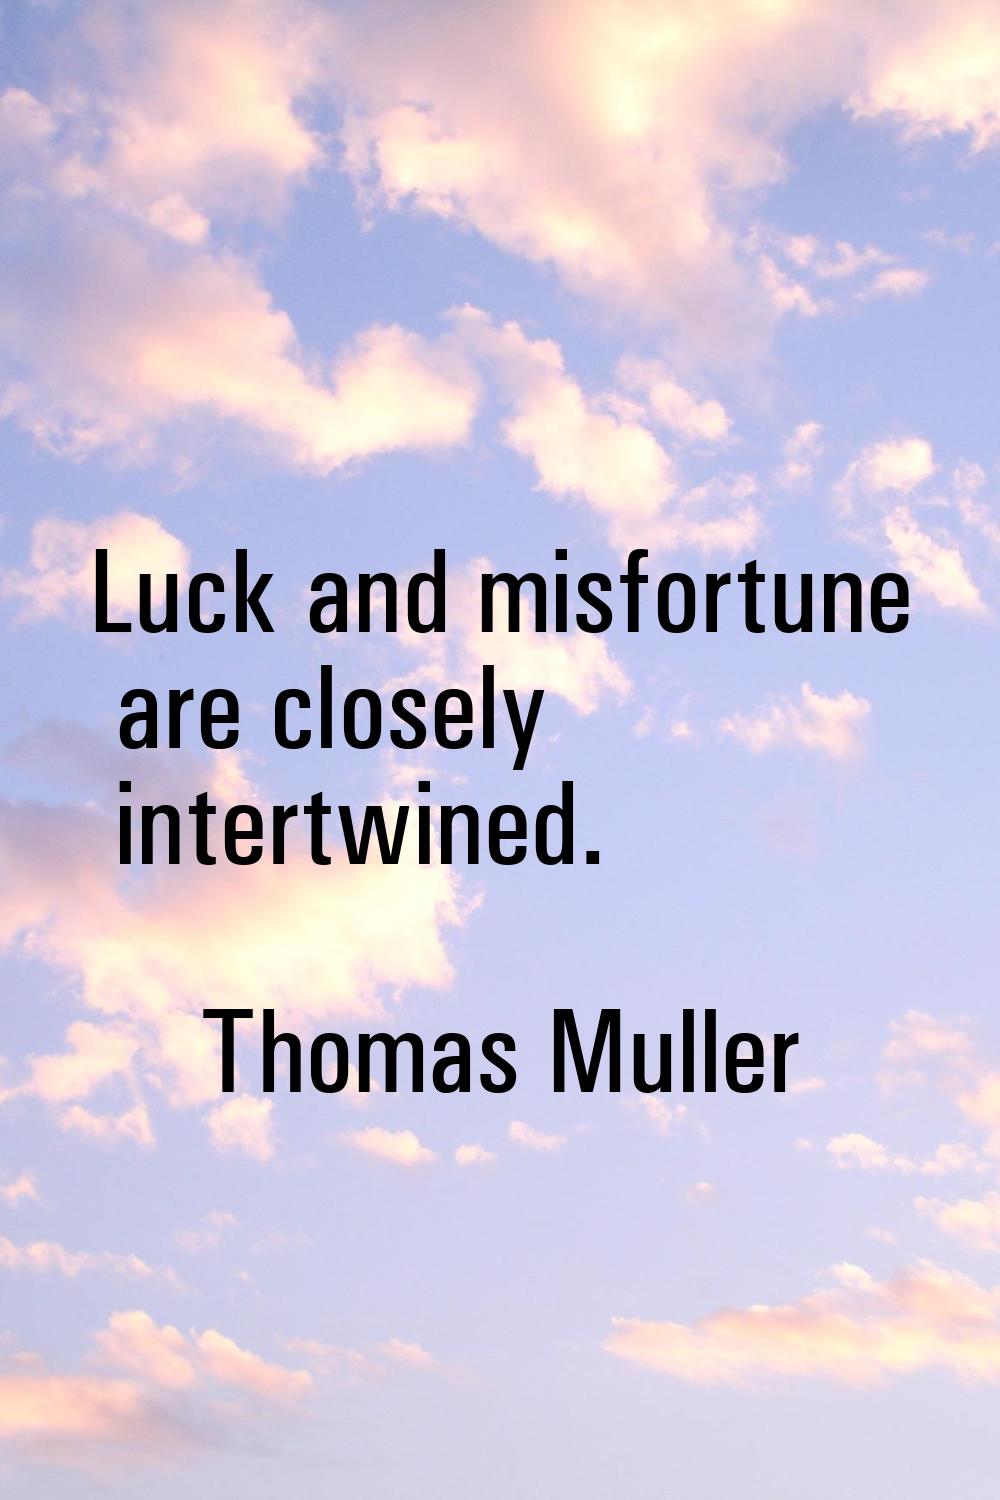 Luck and misfortune are closely intertwined.